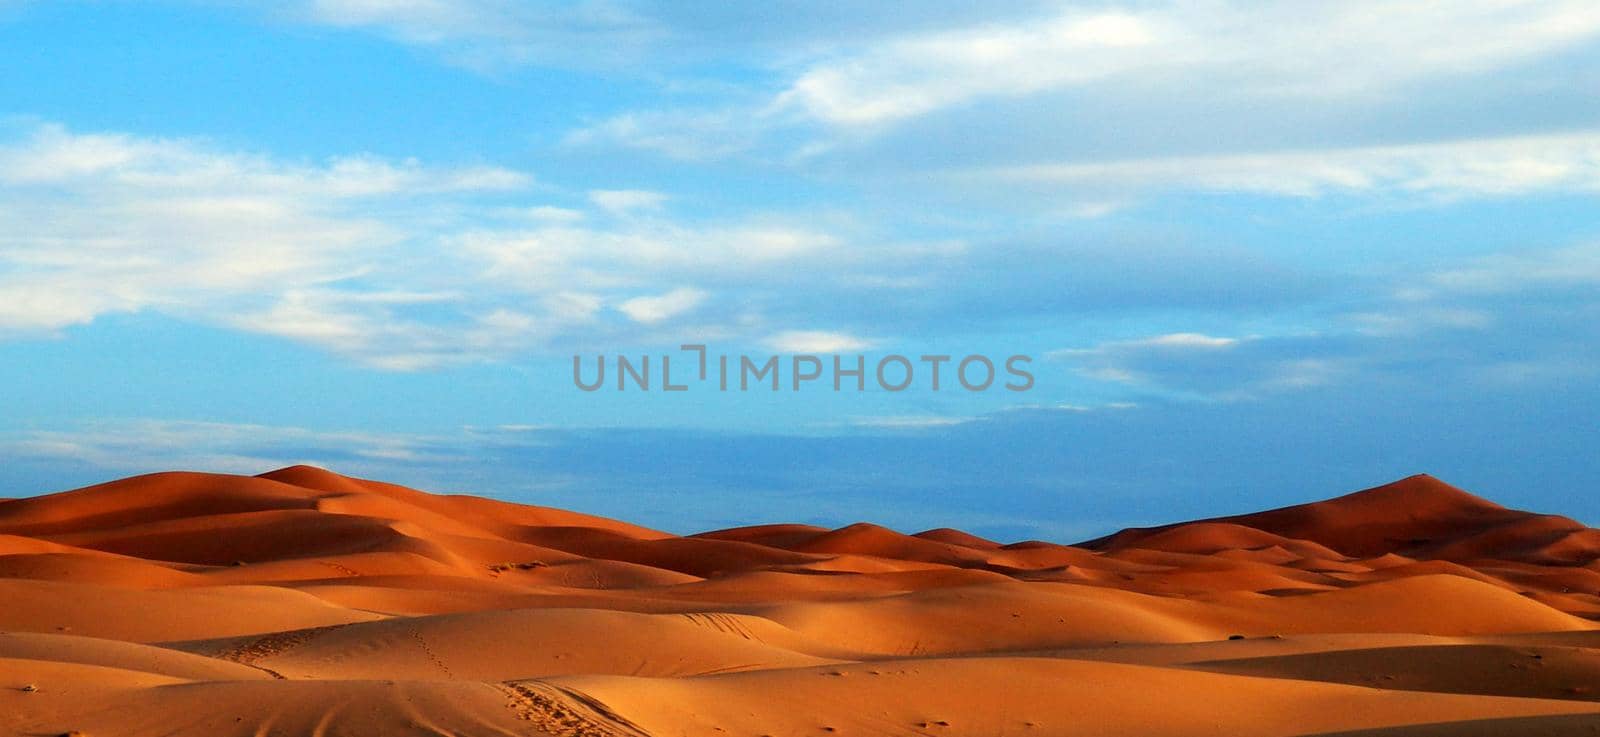 Beautiful pictures of Morocco